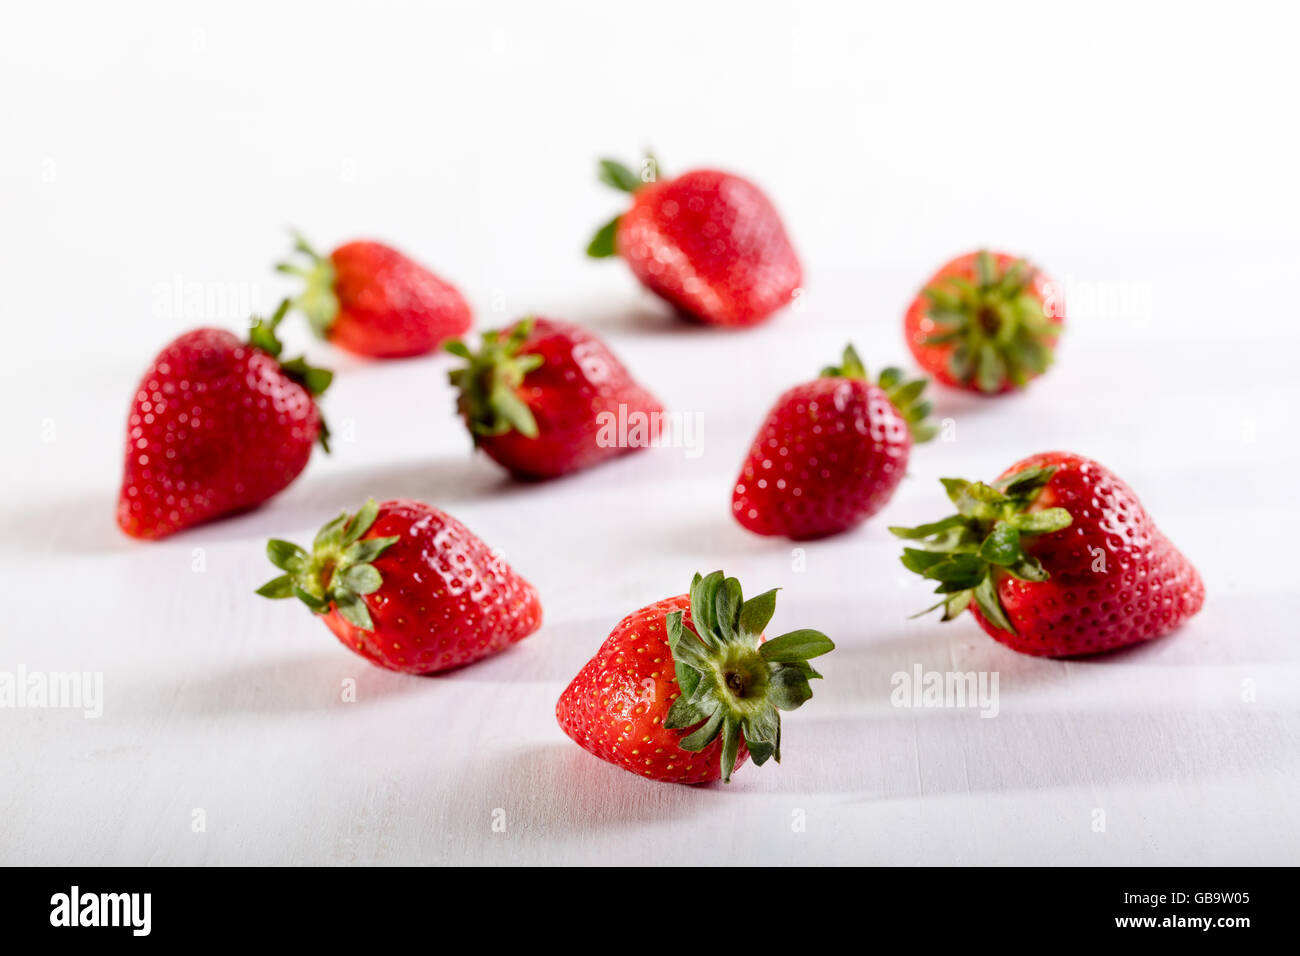 Nine juicy strawberry on the table Stock Photo